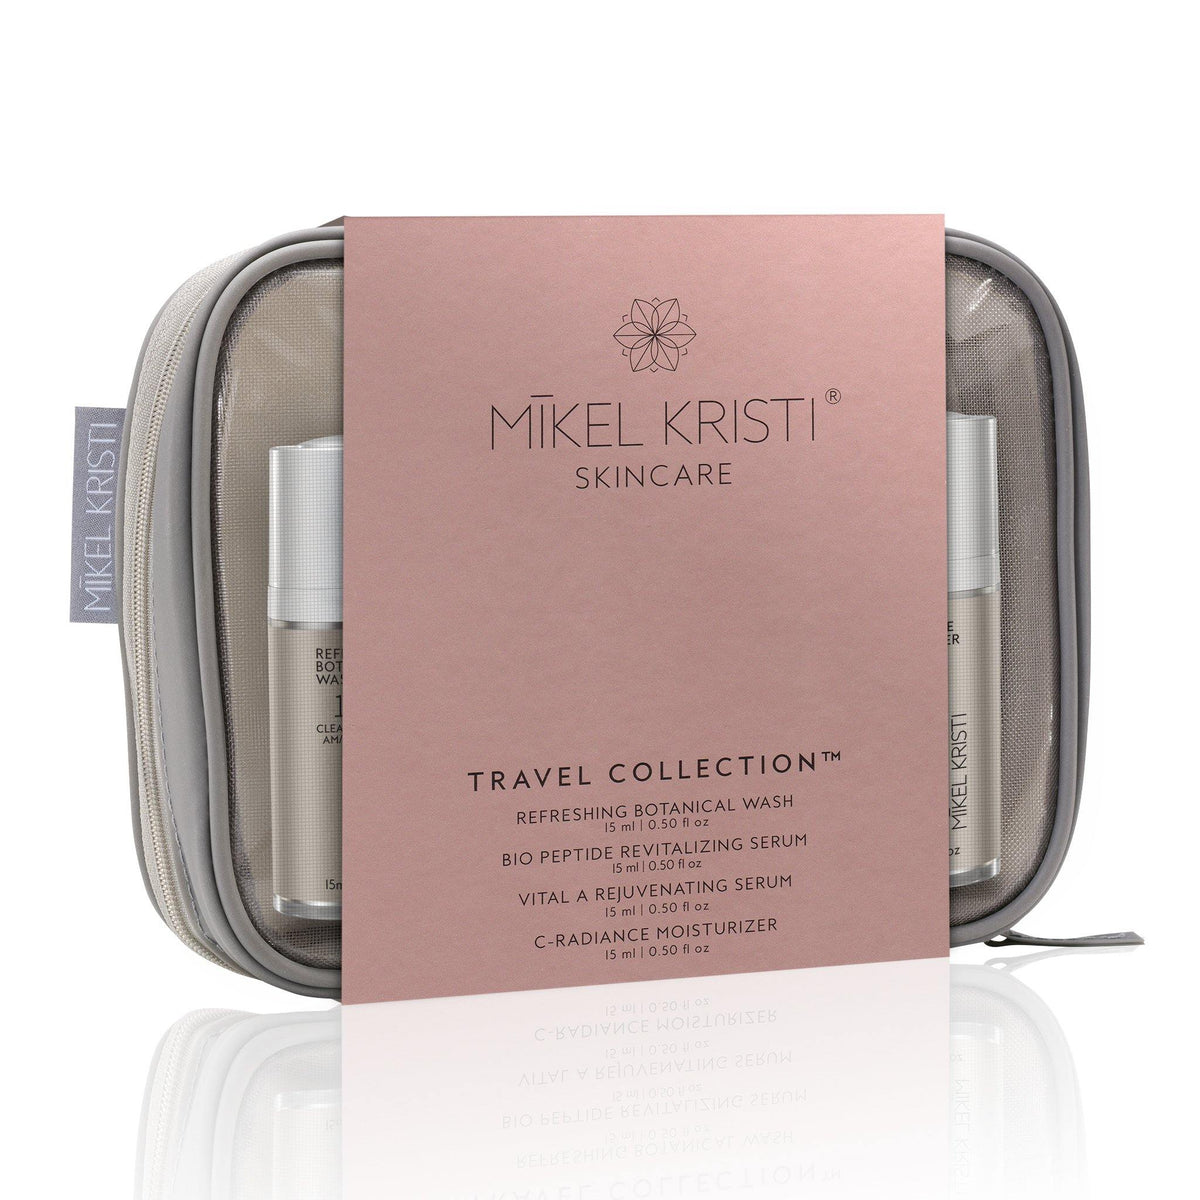 Mikel Kristi Travel Collection skincare regimen. Contains the Core 4 products that come in airless pump 15ml bottles. TSA ready travel bag included.